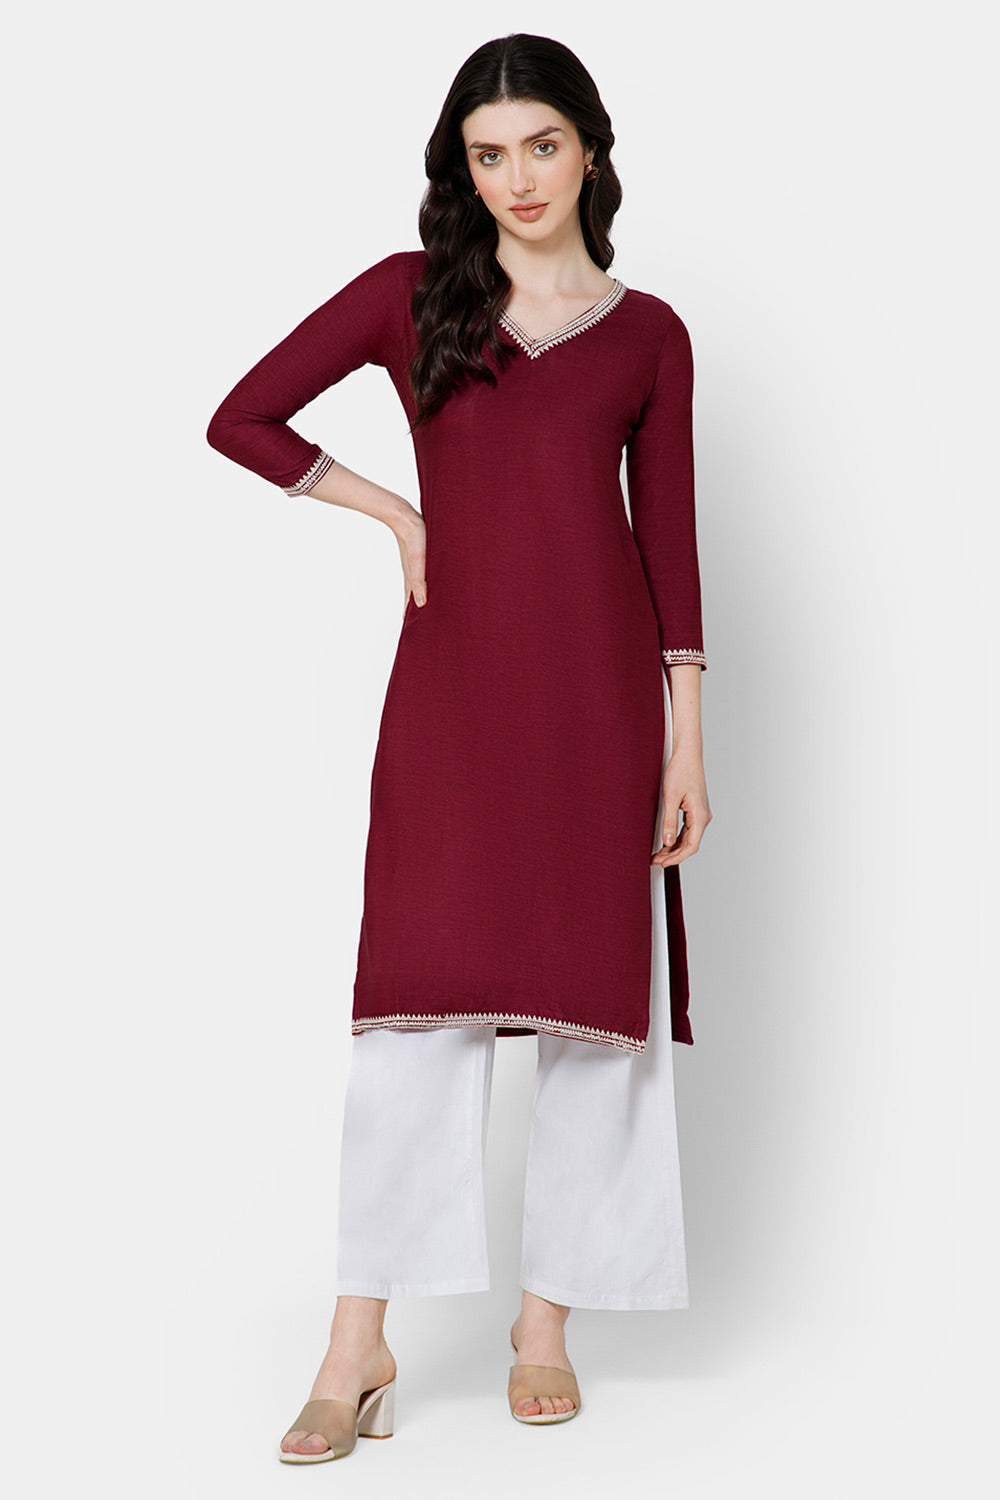 Mythri Women's Casual Kurthi with Minimalistic Embroidery At The Neckline - Red - E076